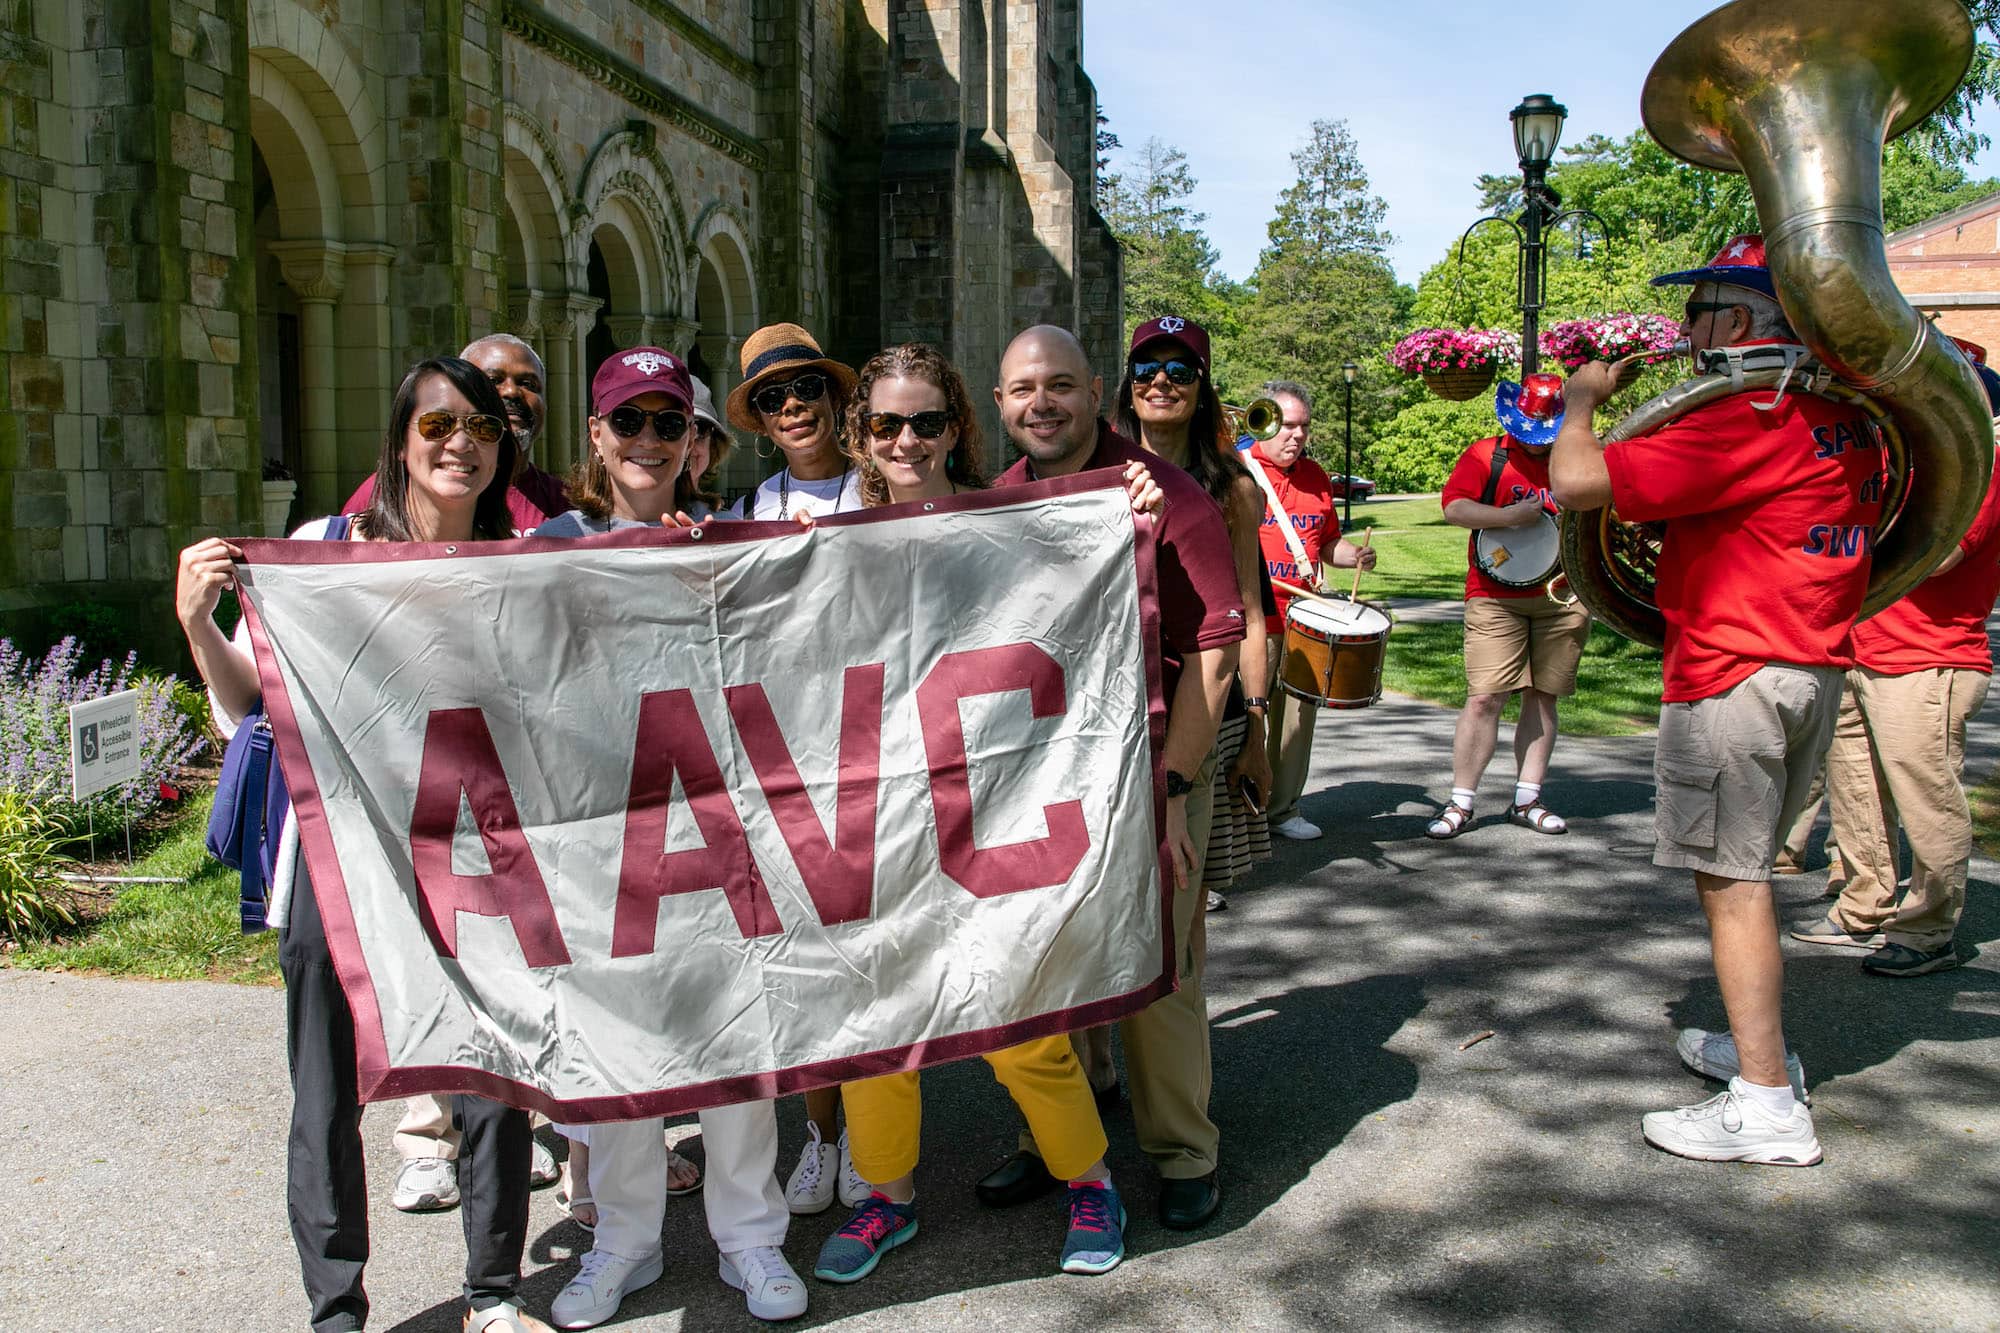 Group of people holding up an AAVC banner